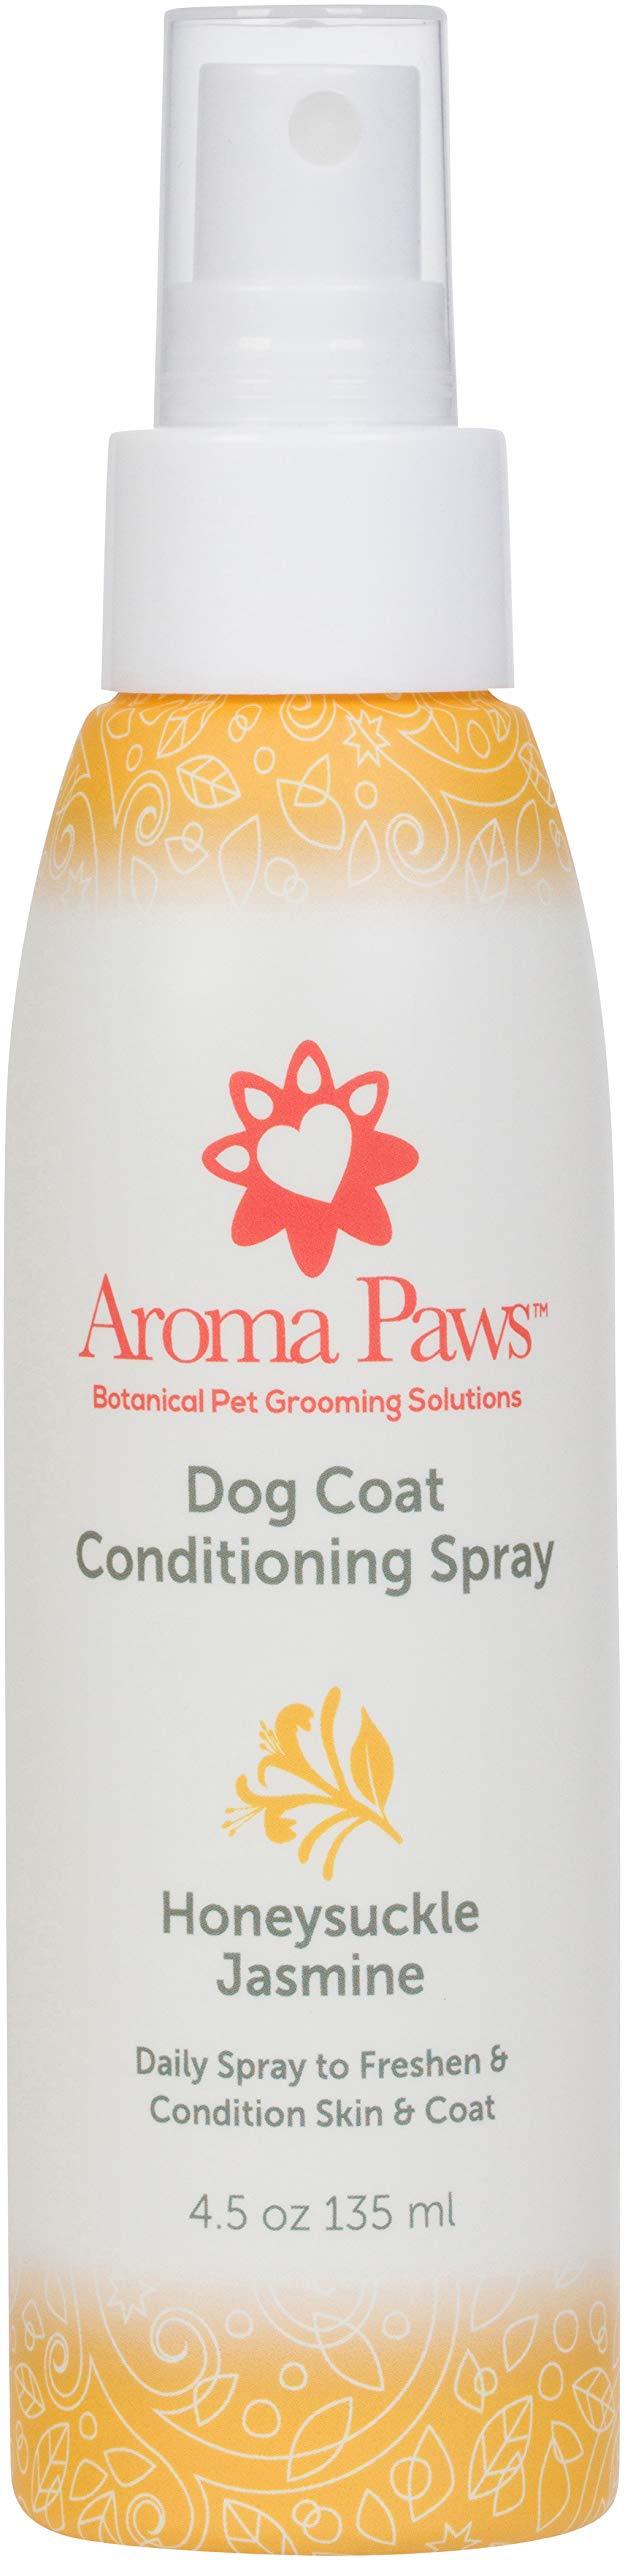 [Australia] - Aroma Paws Scented Dog Coat Spray – Cleansing, Conditioning, Moisturizing – Toxin Free, Healthy Ingredients – Aromatic Grooming Puppy Spray – Loosens Knots, Tangles – 4.5 Oz. Honeysuckle Jasmine 